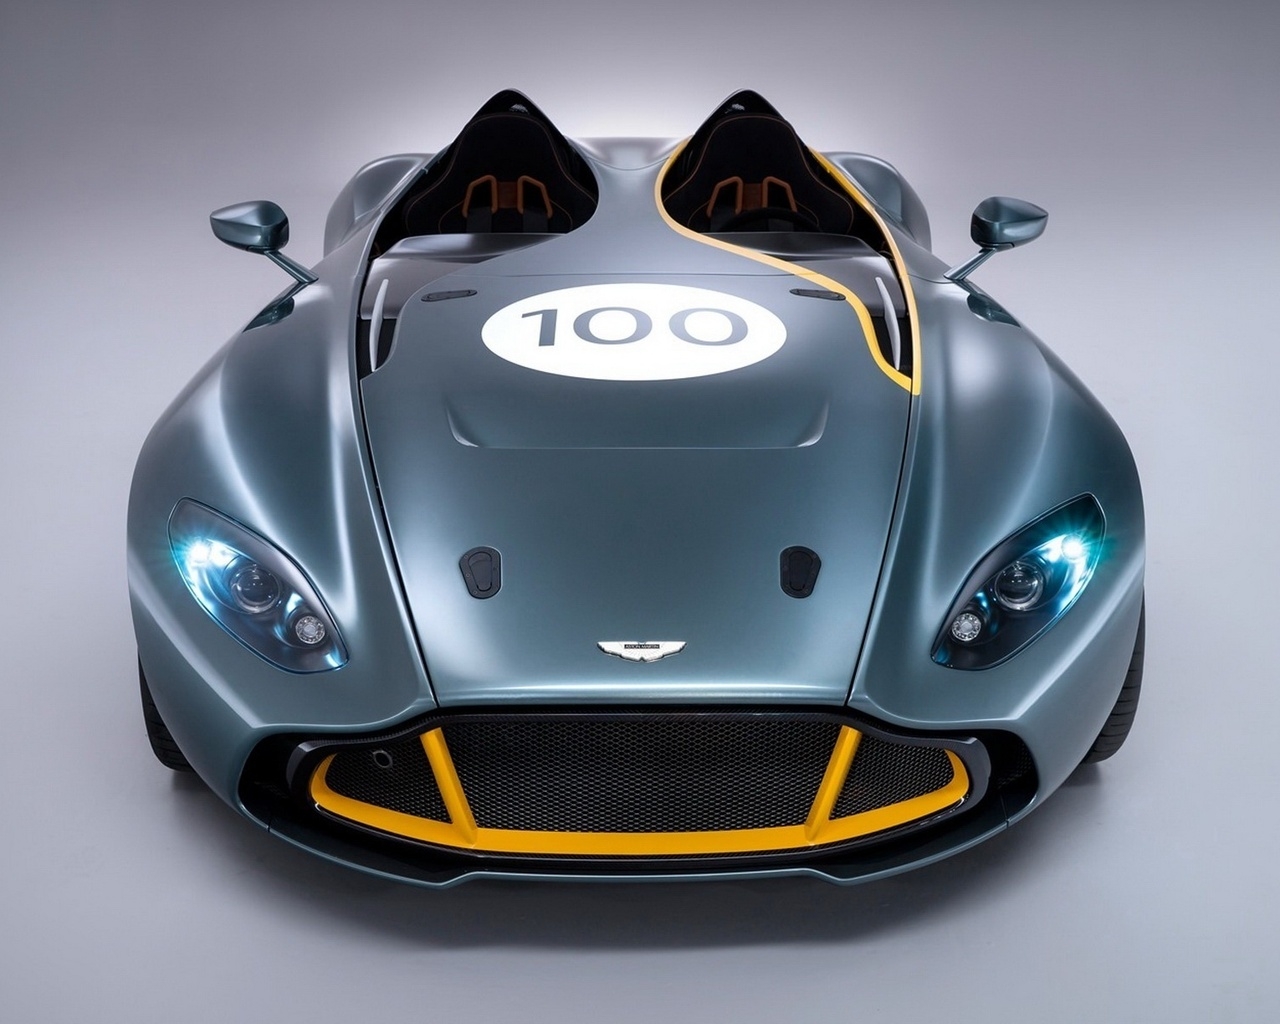 Aston Martin CC100 Speedster Front View for 1280 x 1024 resolution